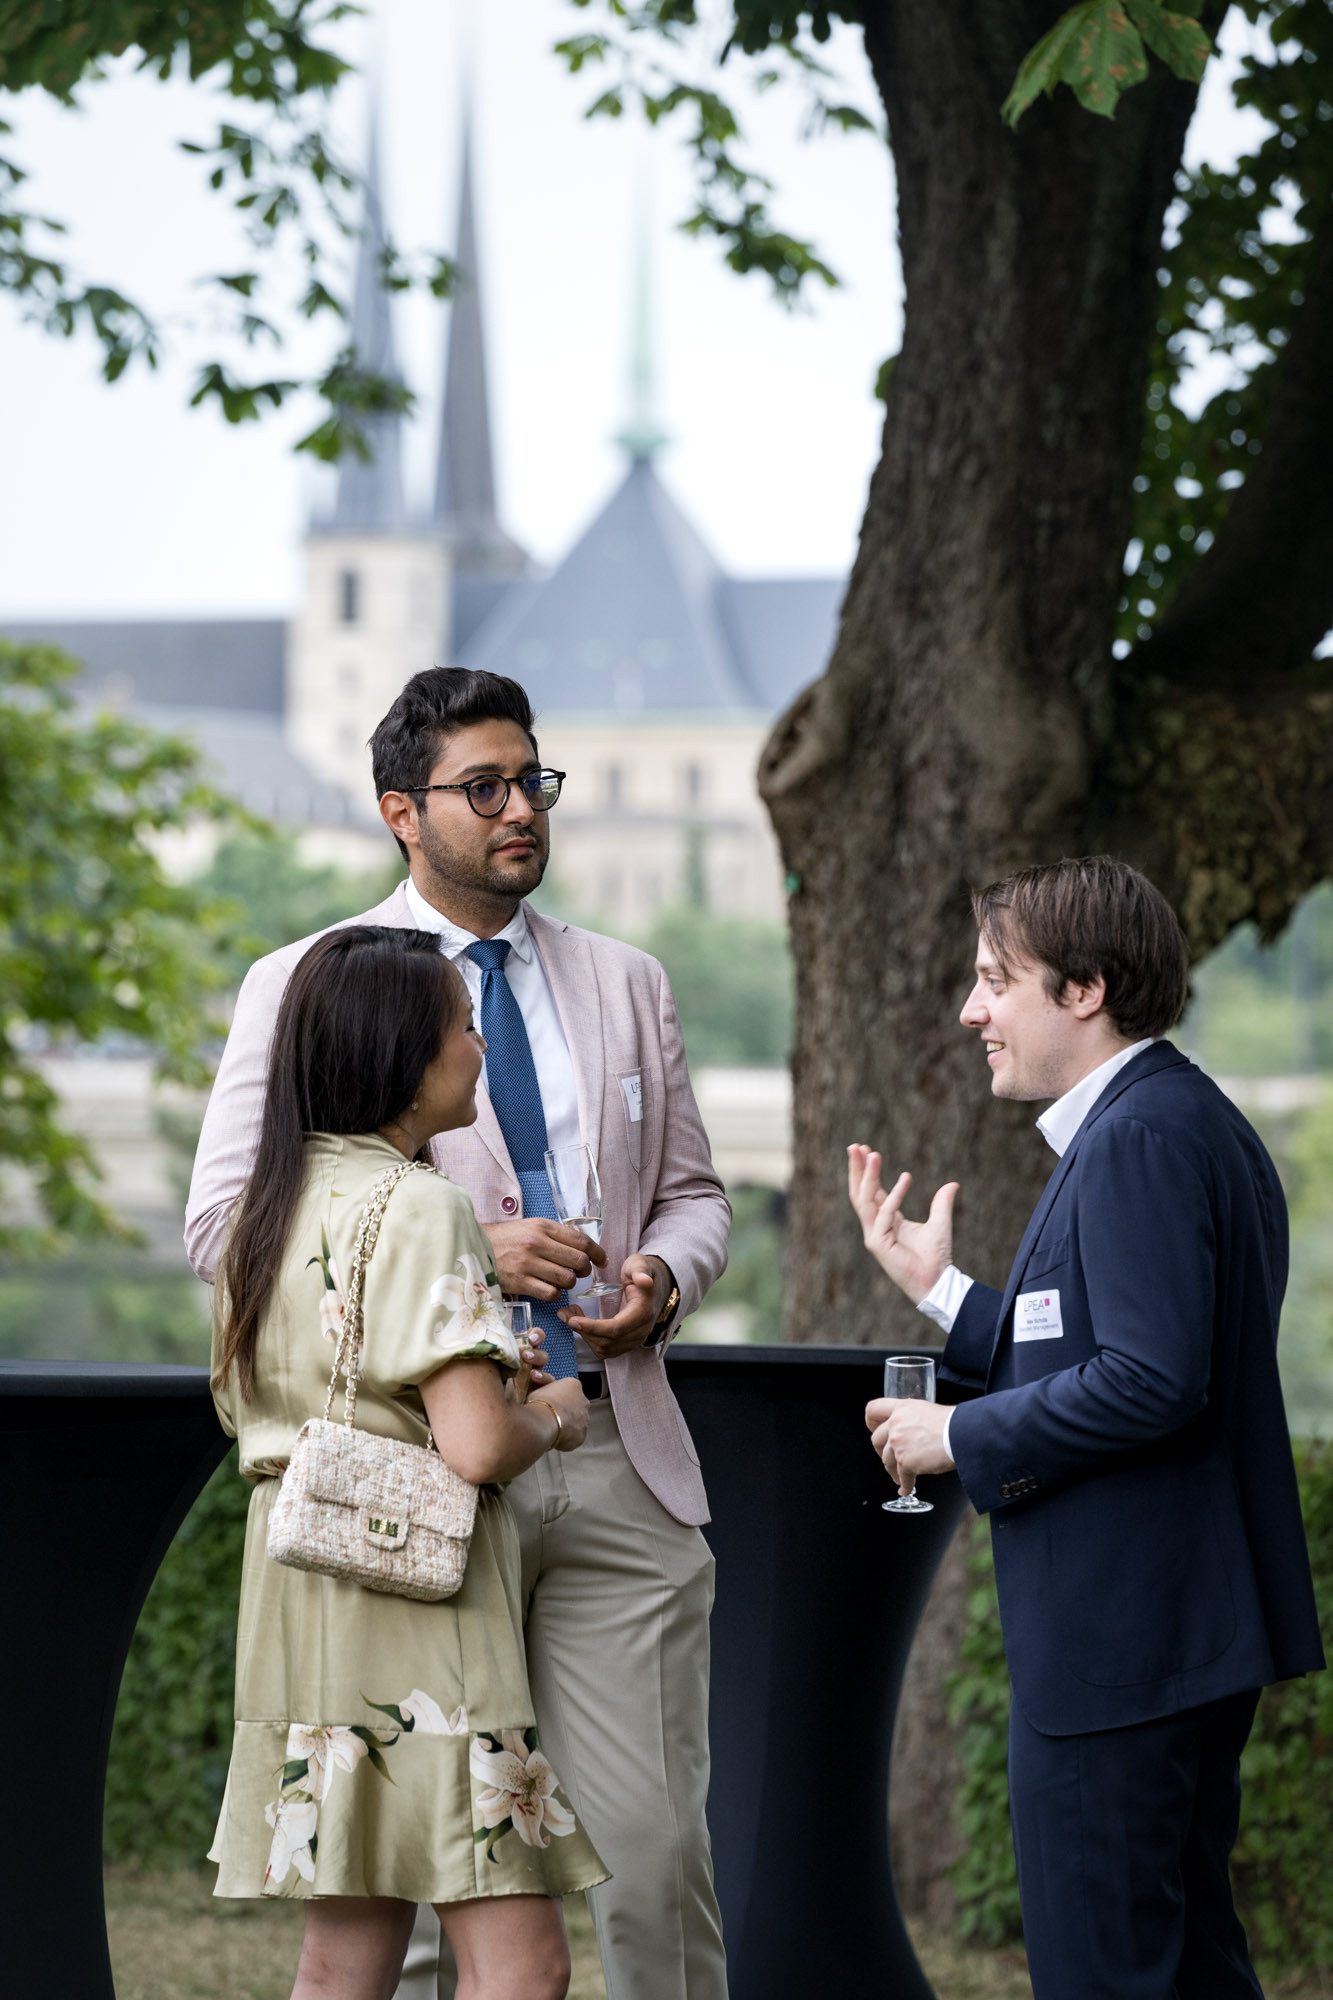 Attendees at the Luxembourg Private Equity and Venture Capital Association’s (LPEA) summer party, held on 11 July at the Hotel Parc Belle-Vue in Luxembourg City. Photo: Nader Ghavami